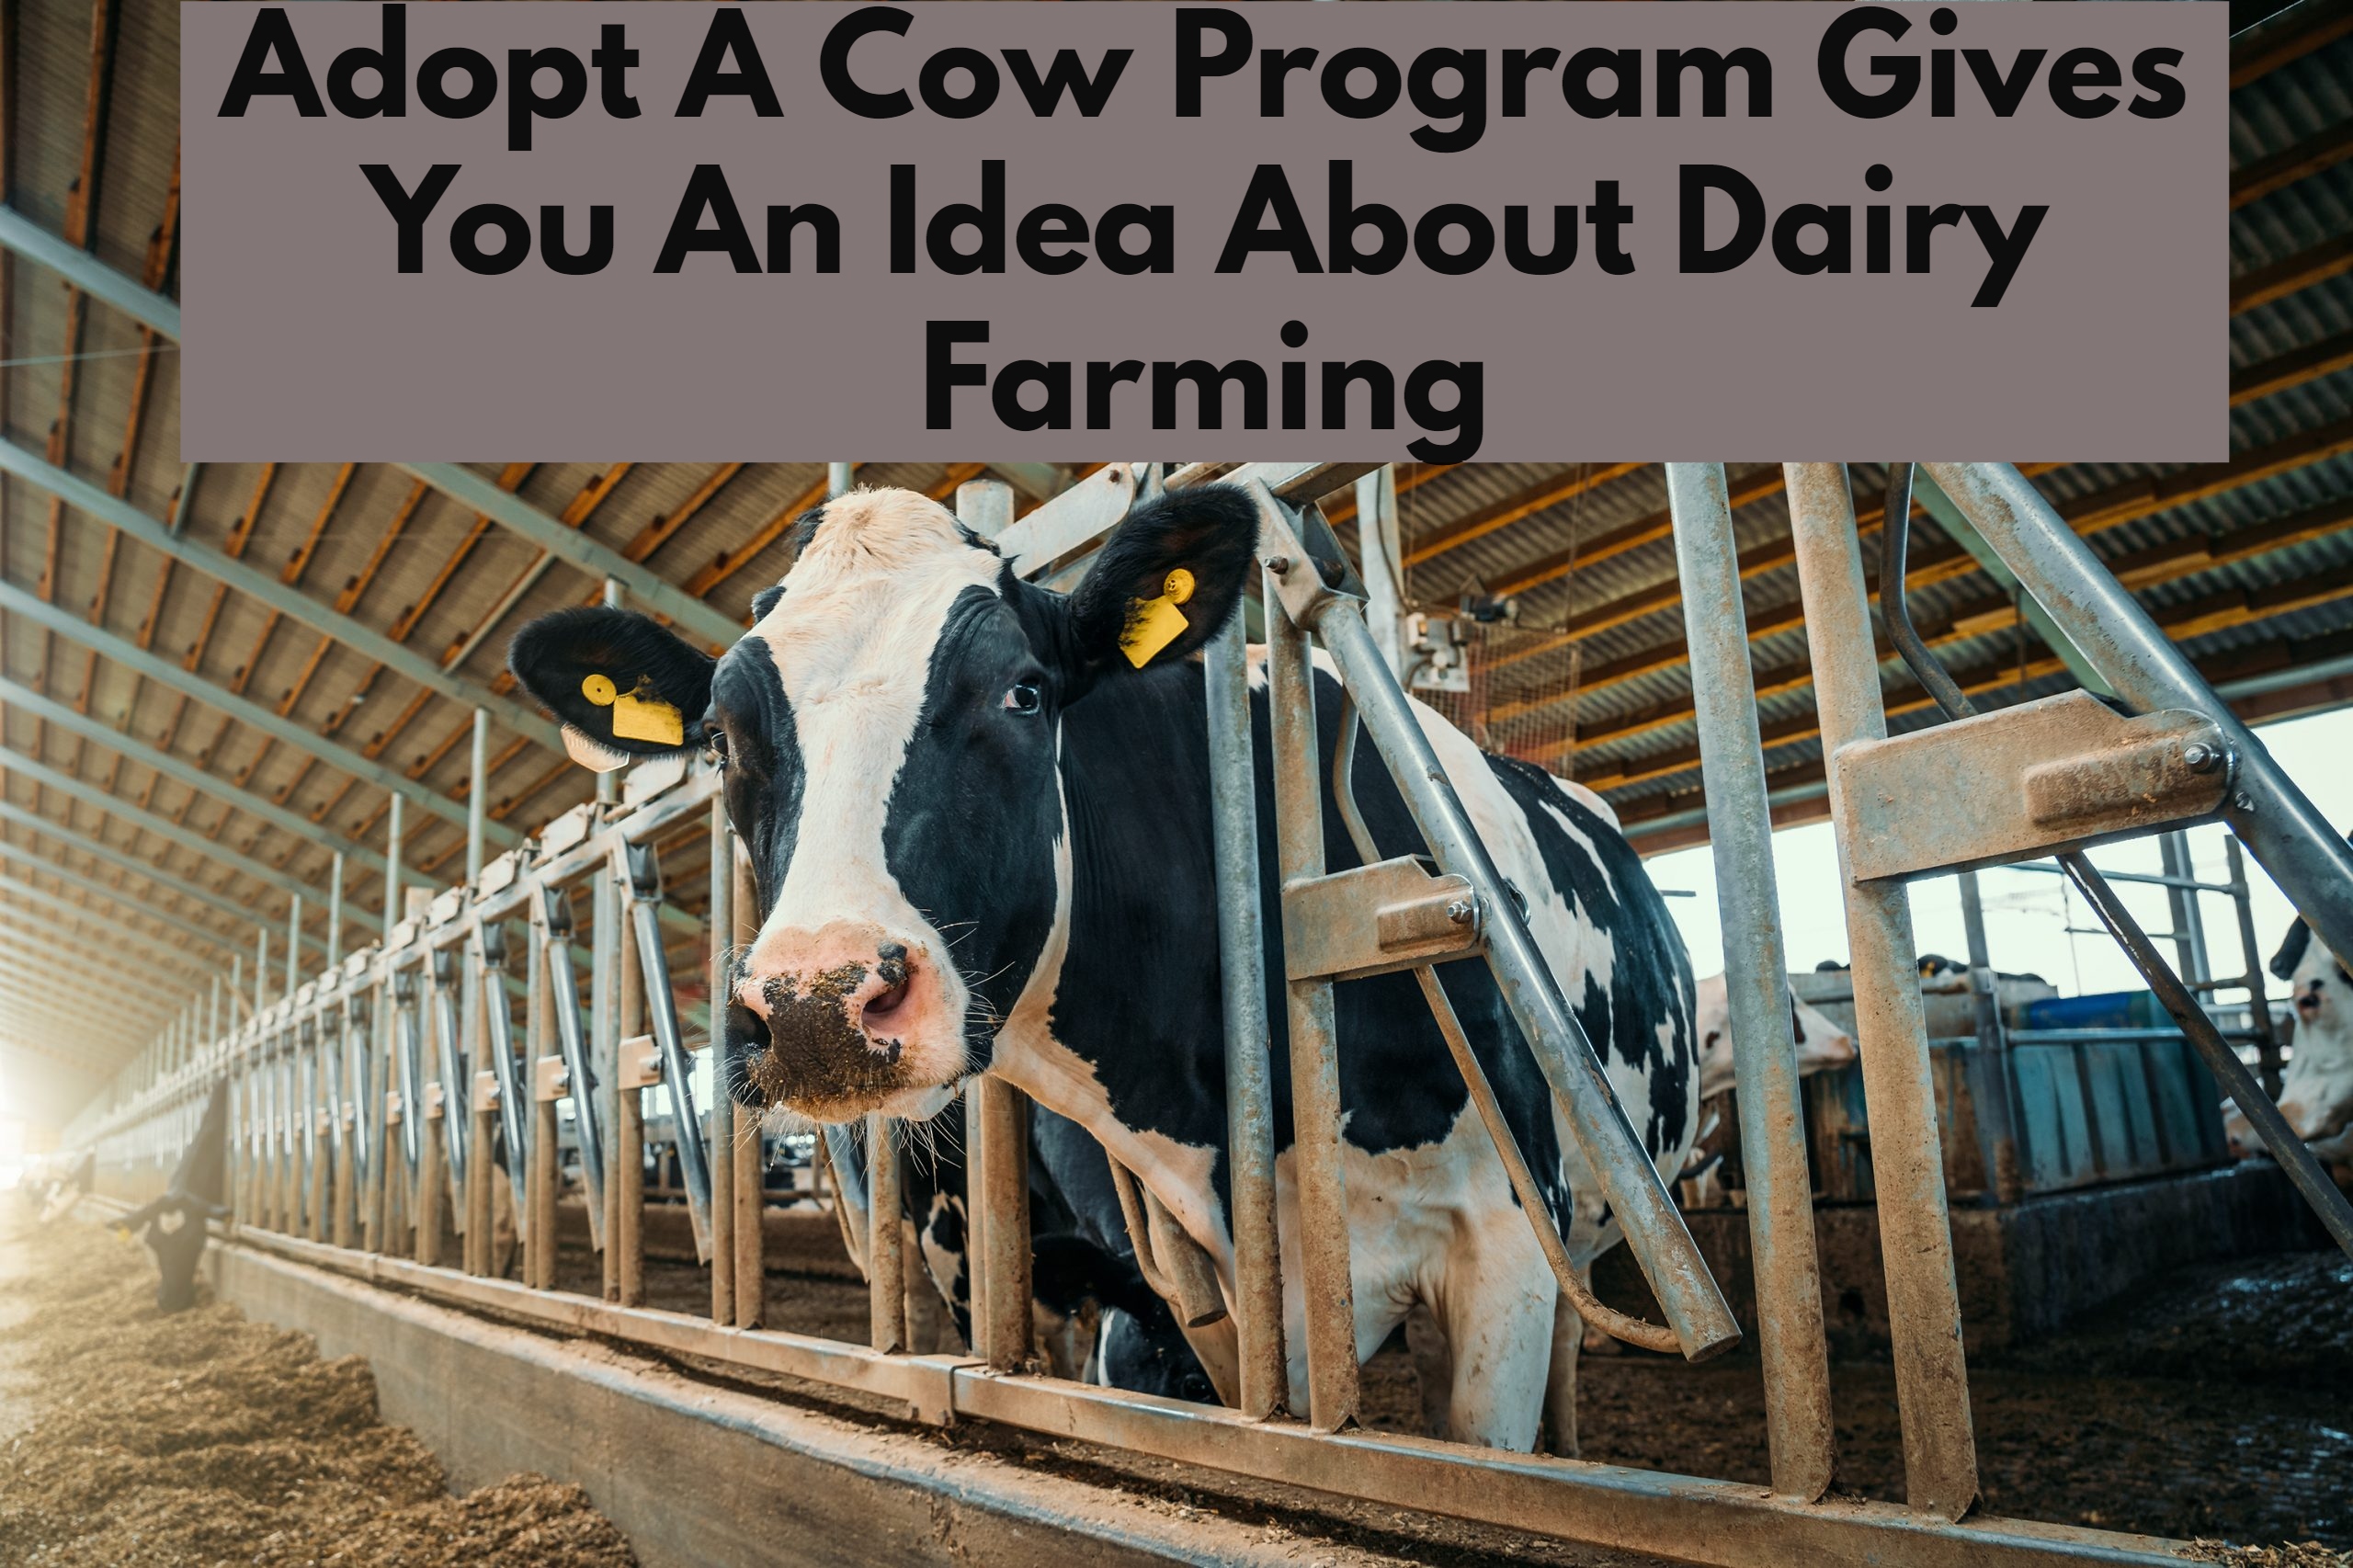 Adopt A Cow Program Gives You An Idea About Dairy Farming